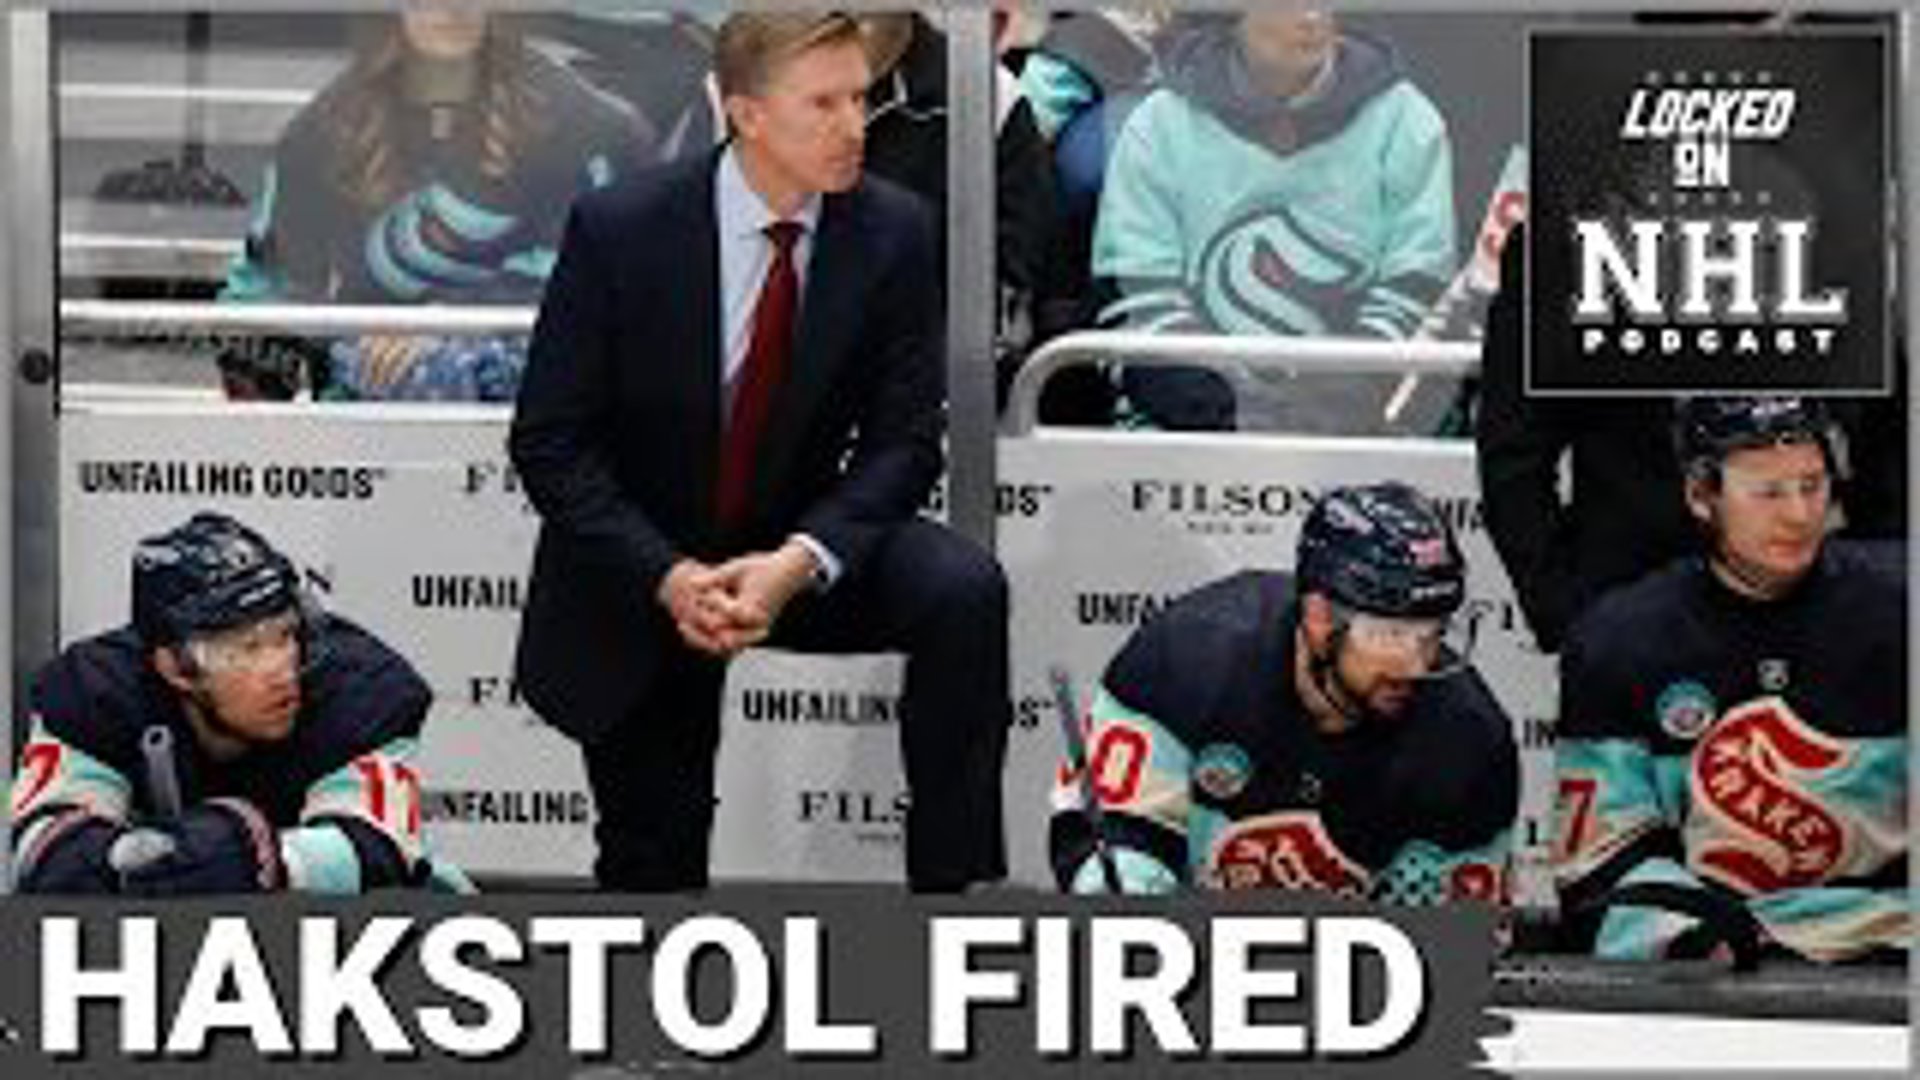 On today's episode of Locked on NHL, Seth Toupal and Nick Morgan start with the surprise firing of Seattle Kraken head coach Dave Hakstol.